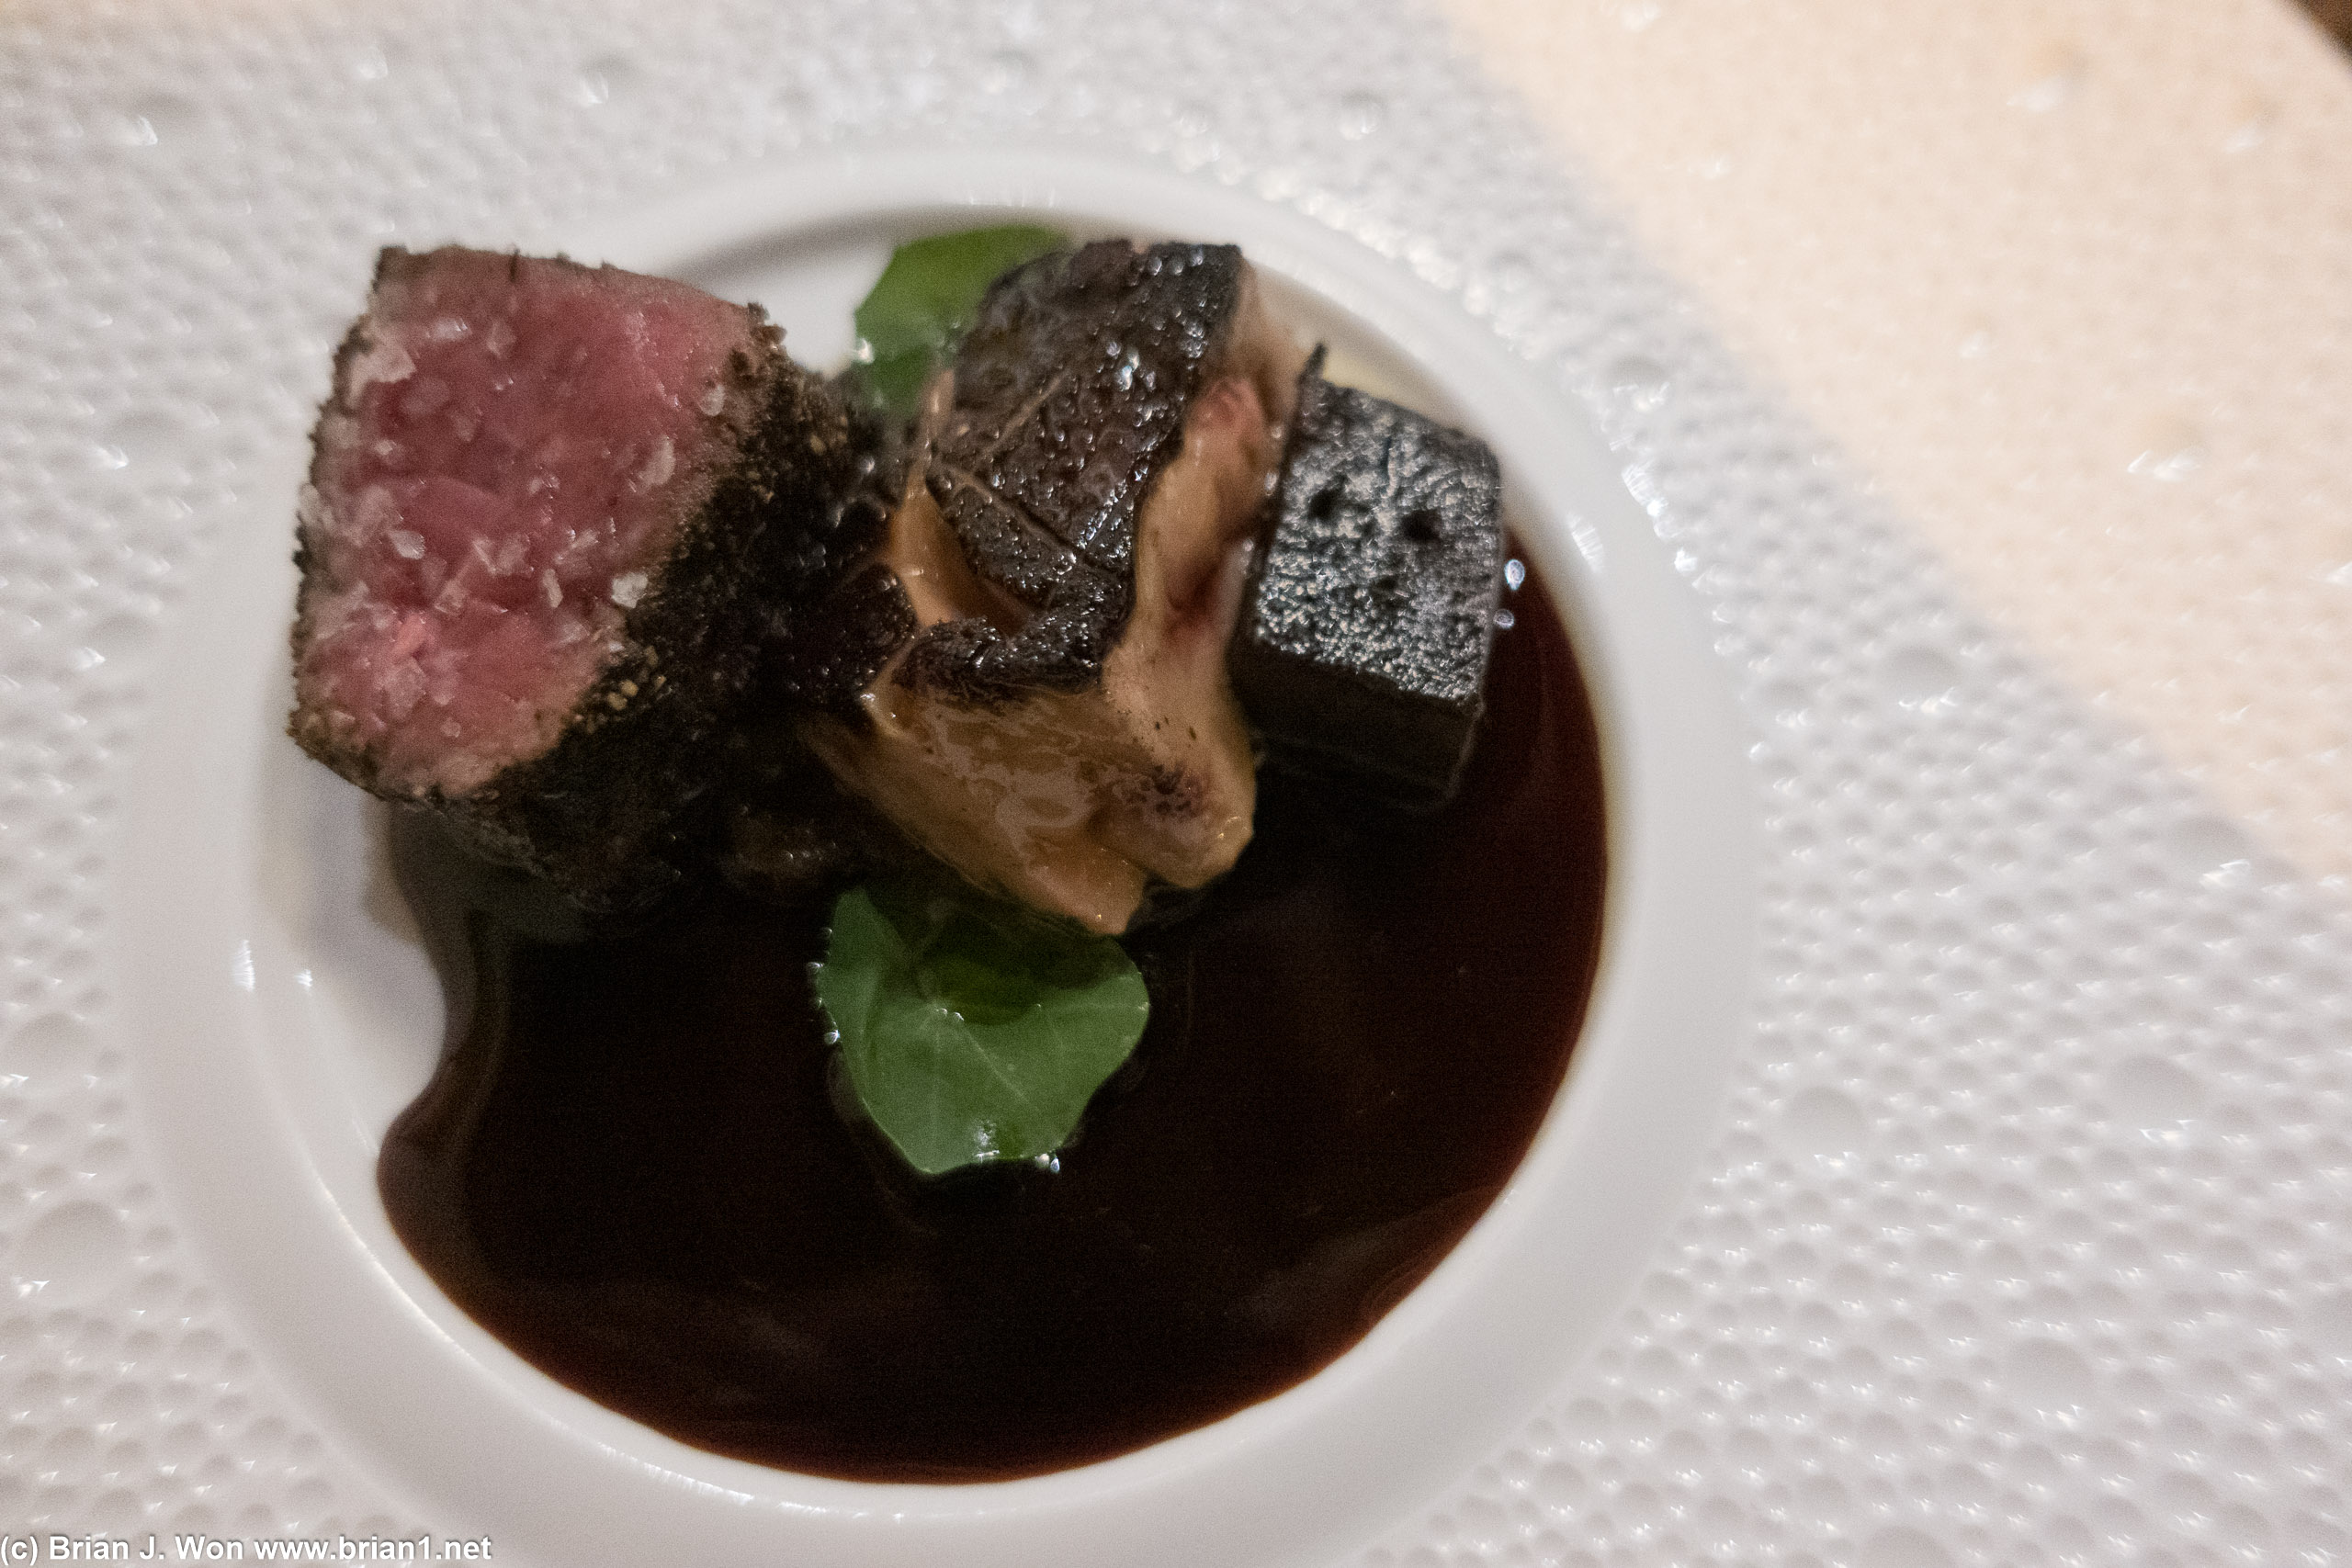 Dry aged elk, foie gras. Foie gras quite overwhelming, and the elk had too much gristle.